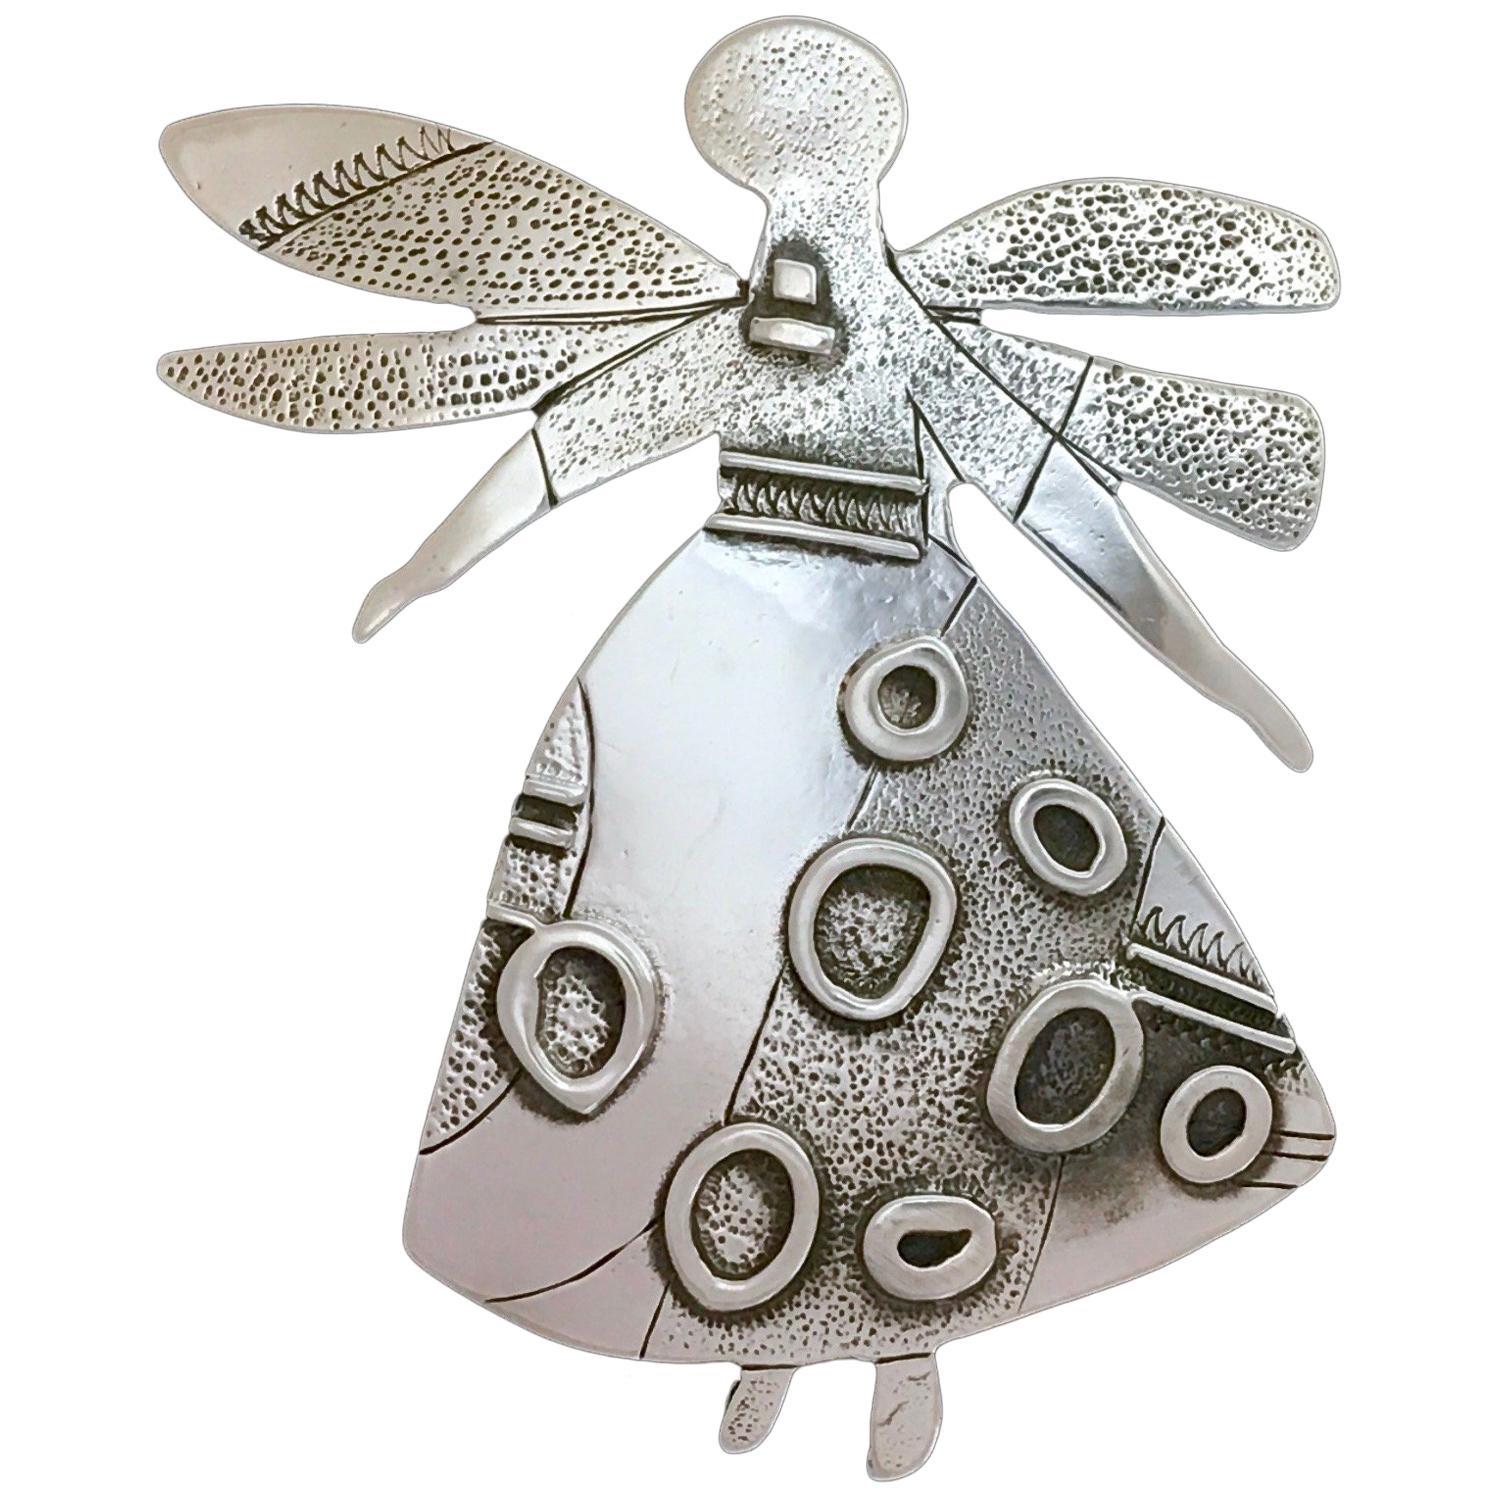 Salt Water Girl, Melanie Yazzie enhancer, pendant, sterling silver,  Navajo 

Melanie A. Yazzie (Navajo-Diné) is a highly regarded multimedia artist known for her printmaking, paintings, sculpture, and jewelry designs.

She has exhibited, lectured,